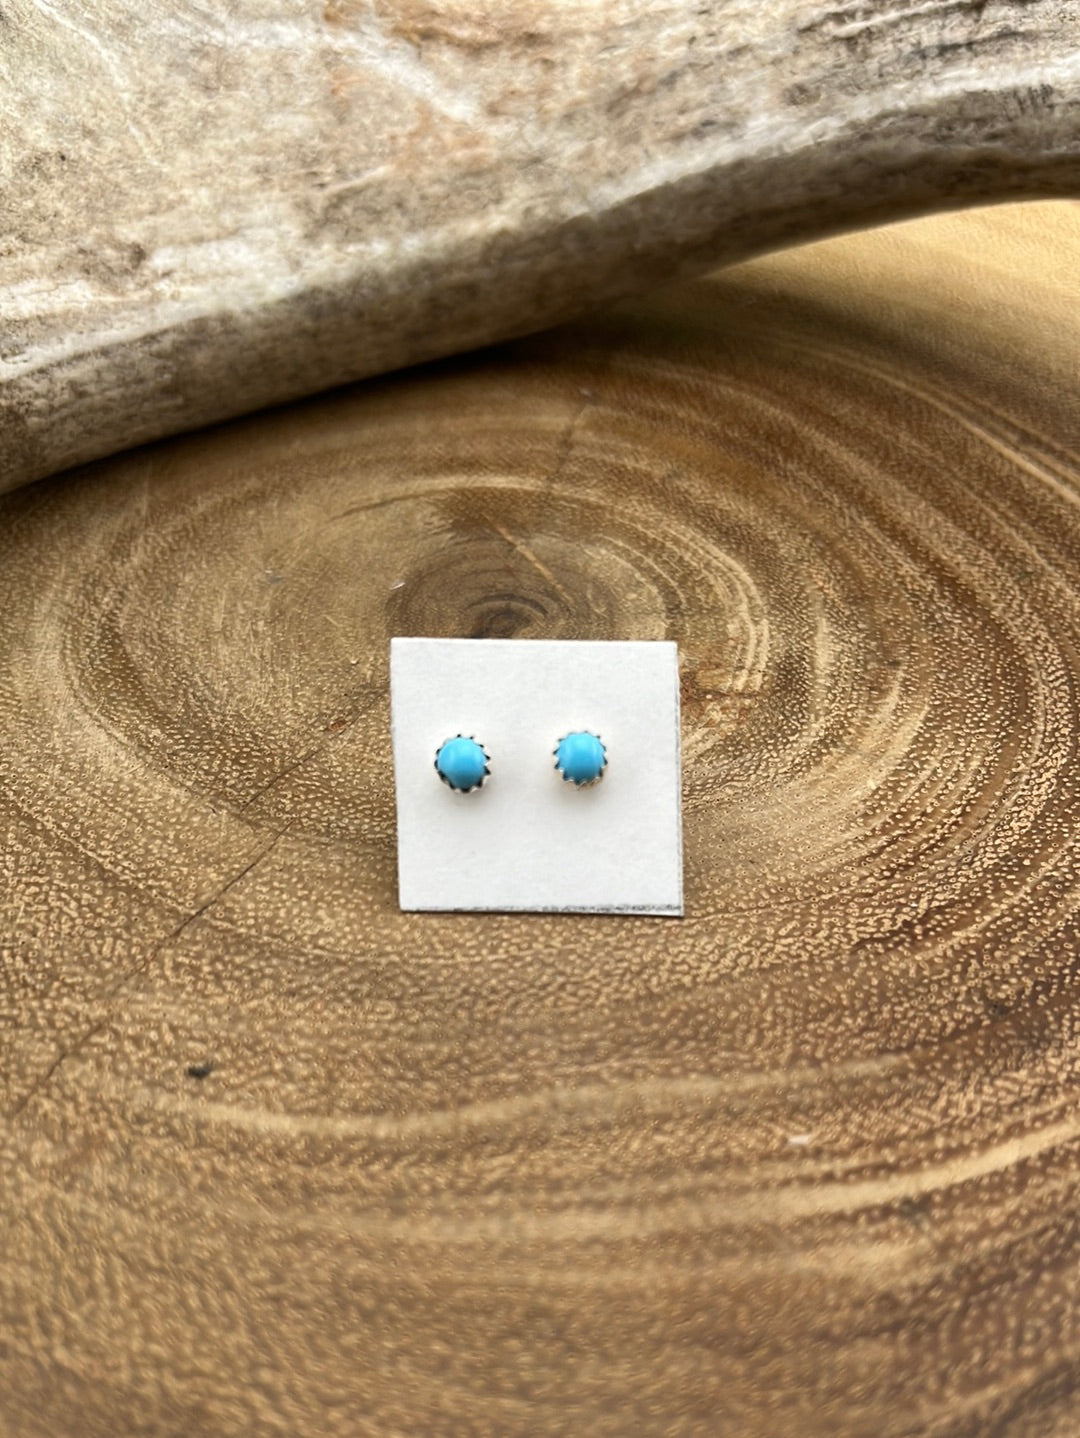 Johnson Petite Round Studs in Scallop Sterling Setting - 3mm Blue